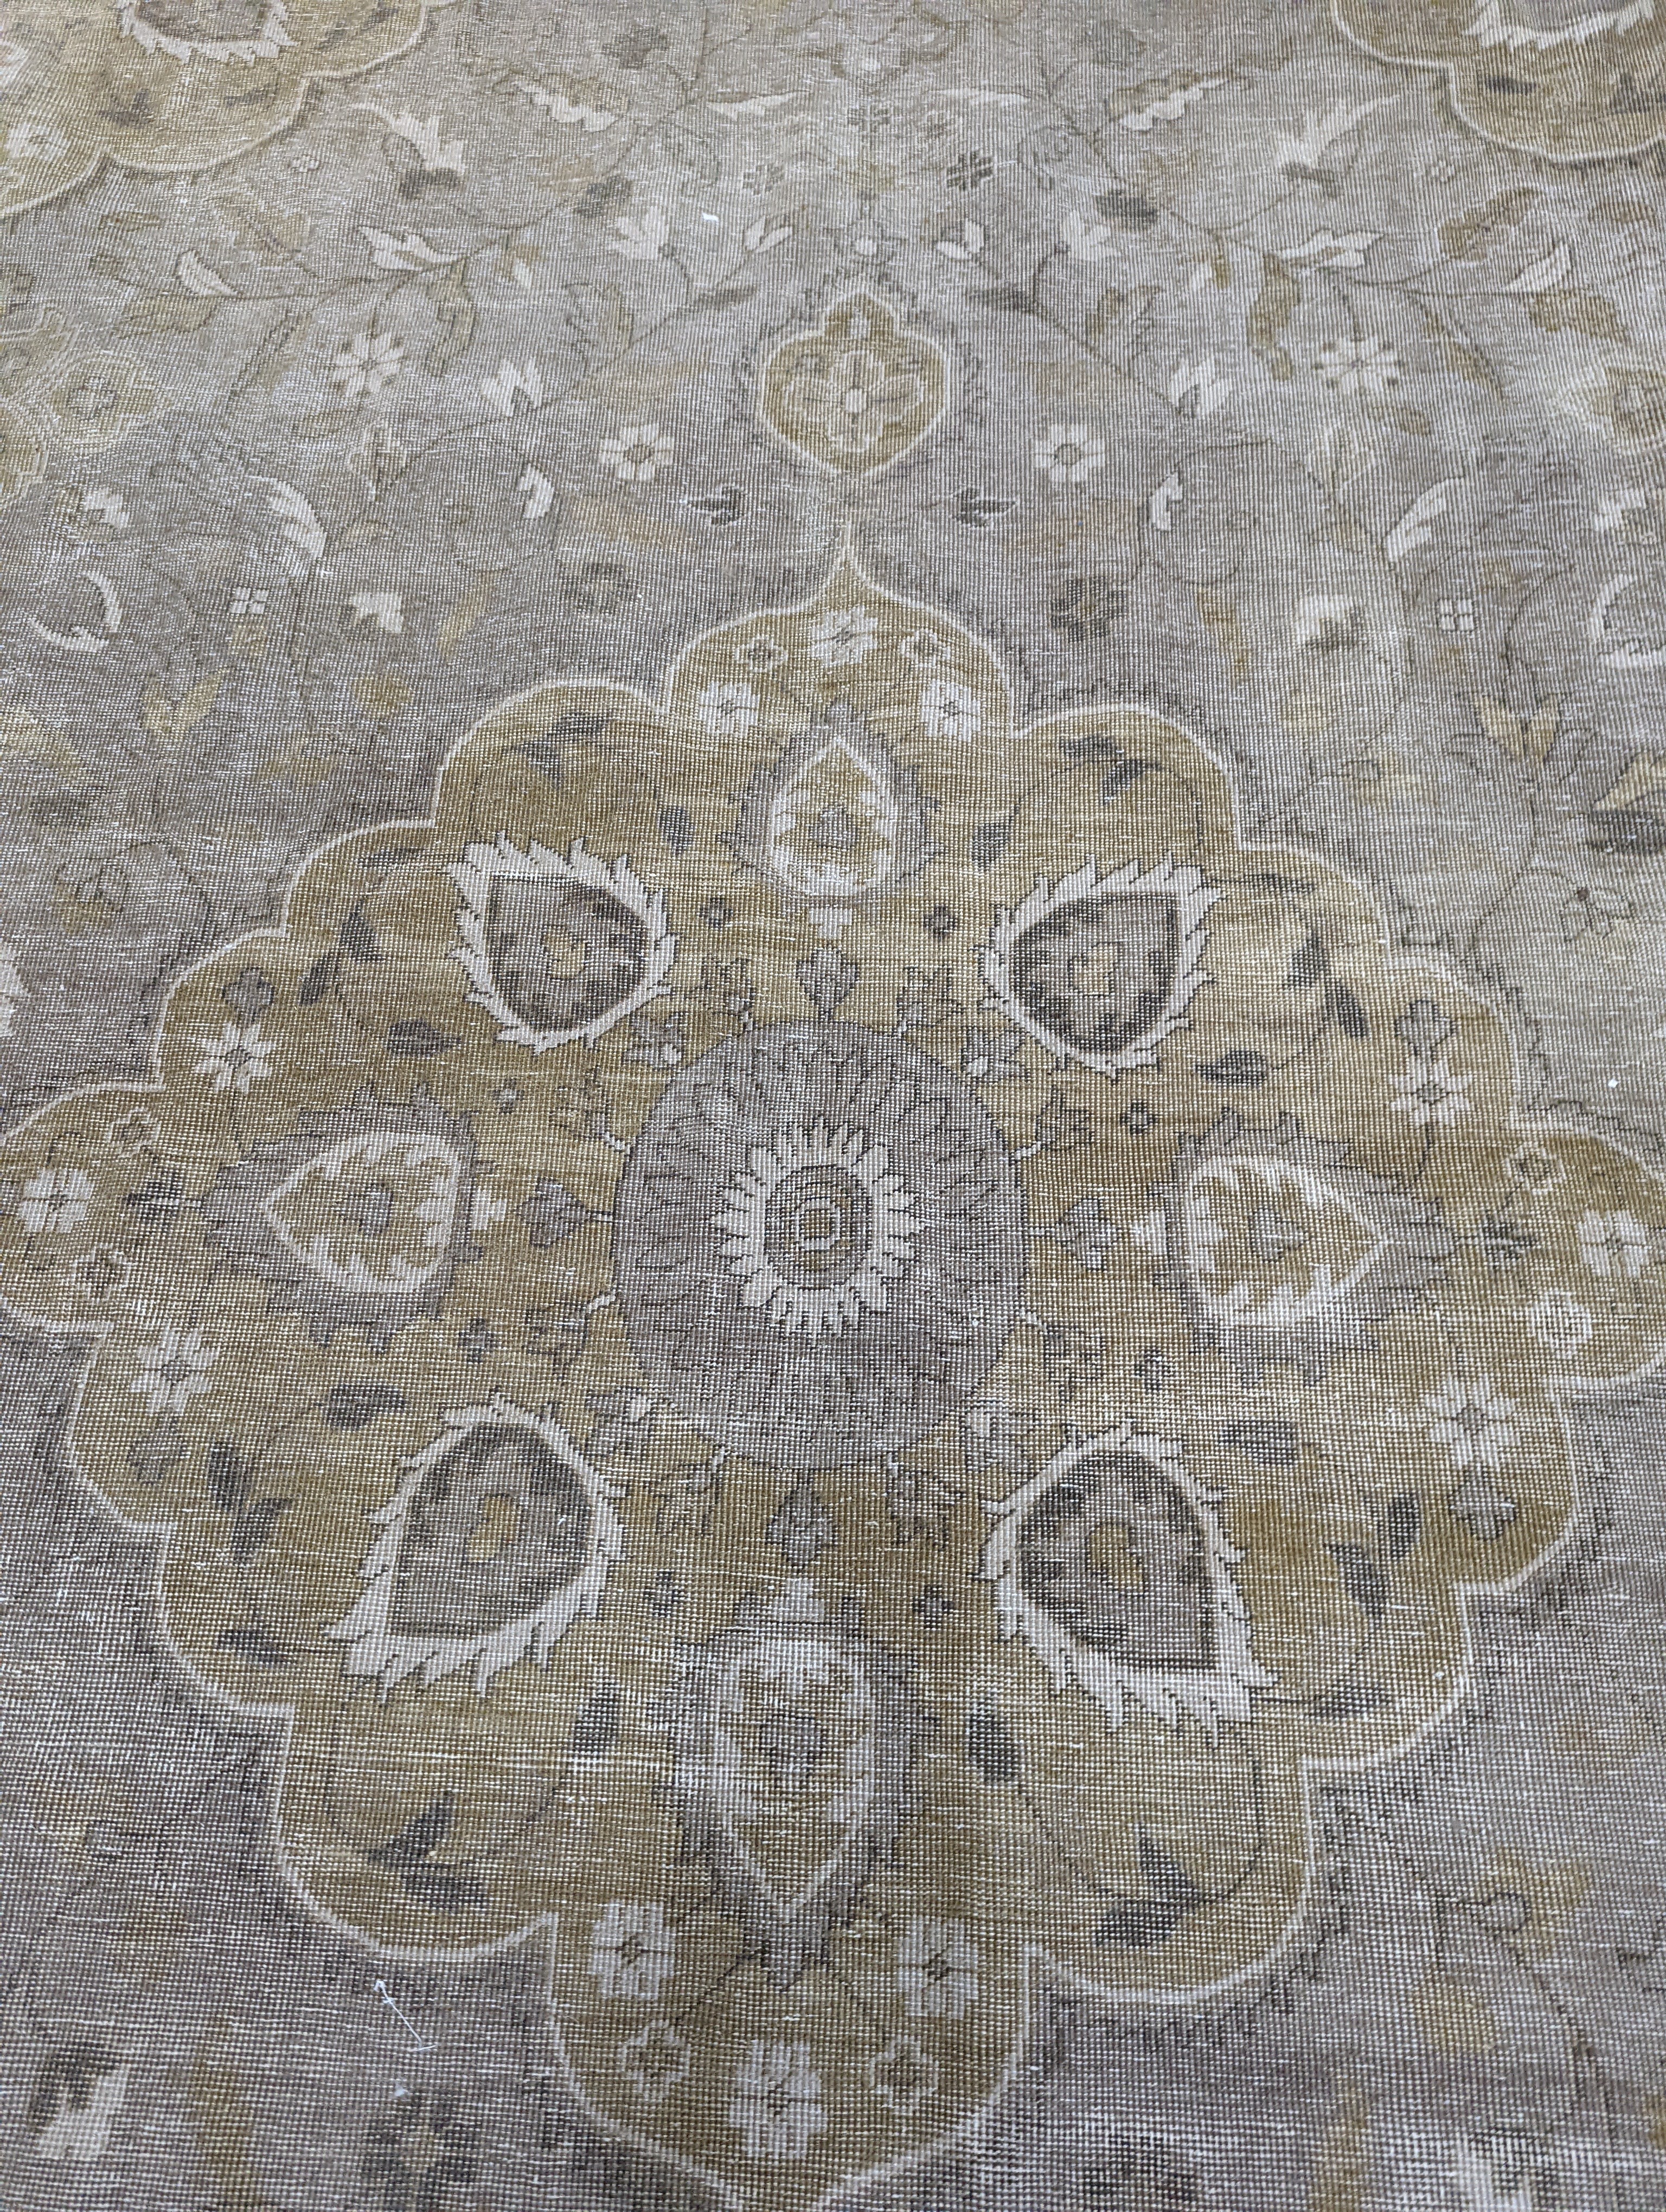 A contemporary North West Persian style pale wool carpet, 420 x 293cm - Image 8 of 10